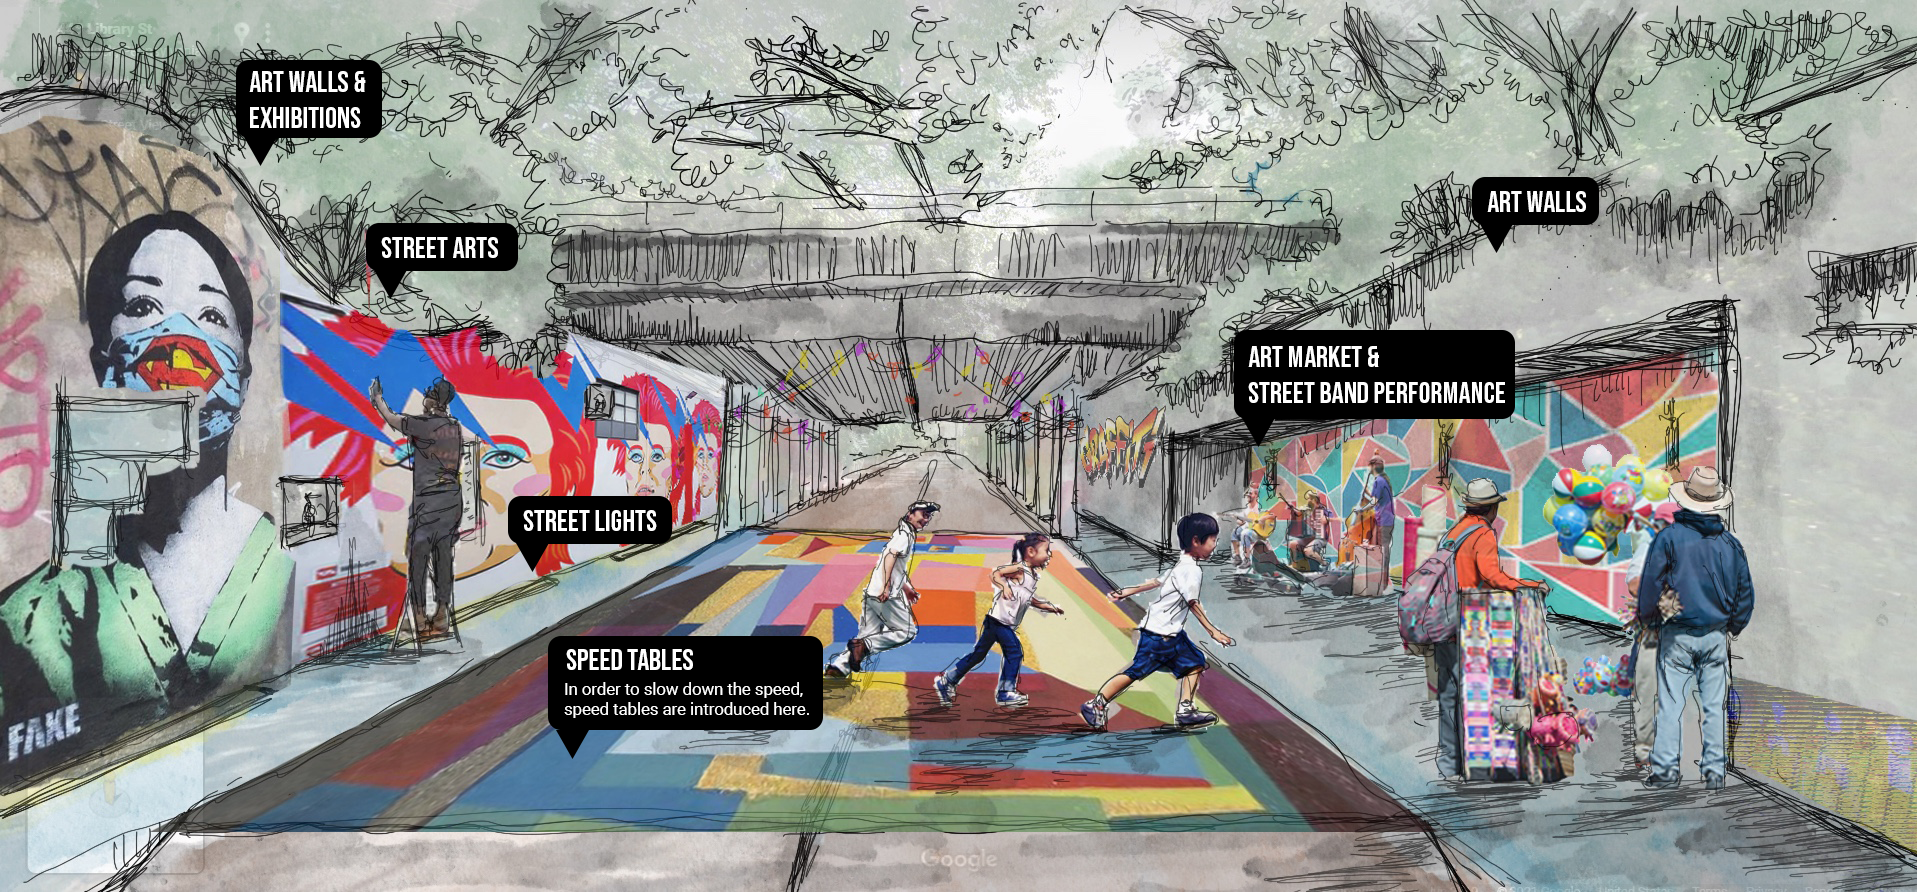 Rendered image of proposal along Library Street, showing people and children along art walls, speed tables, market spaces. 